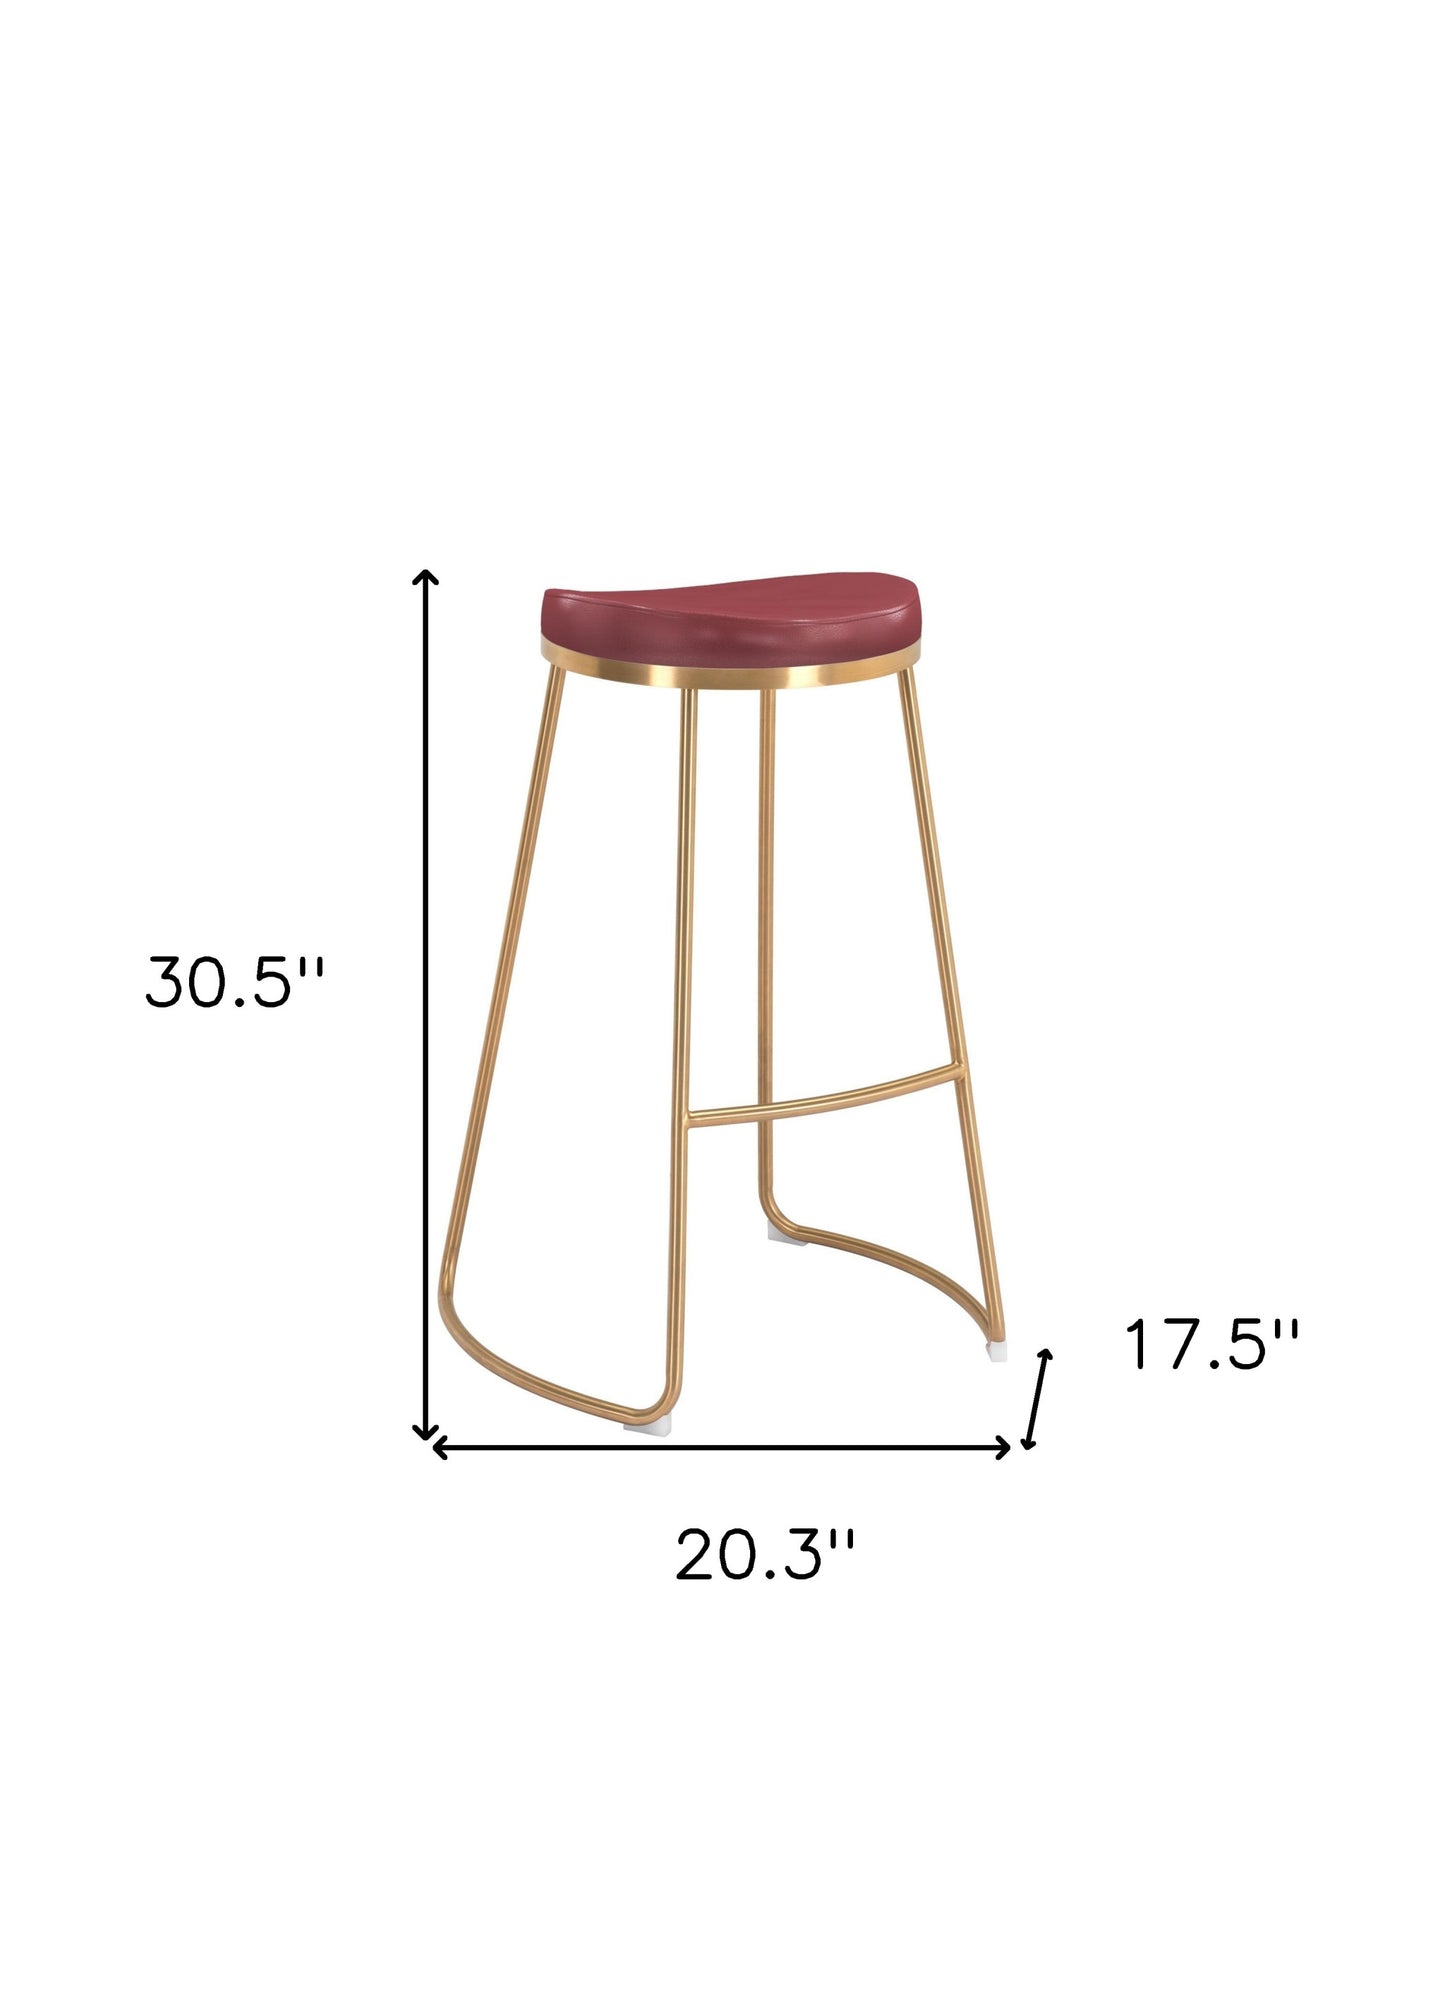 Set Of Two 31" Burgundy And Gold Steel Backless Bar Height Chairs With Footrest By Homeroots